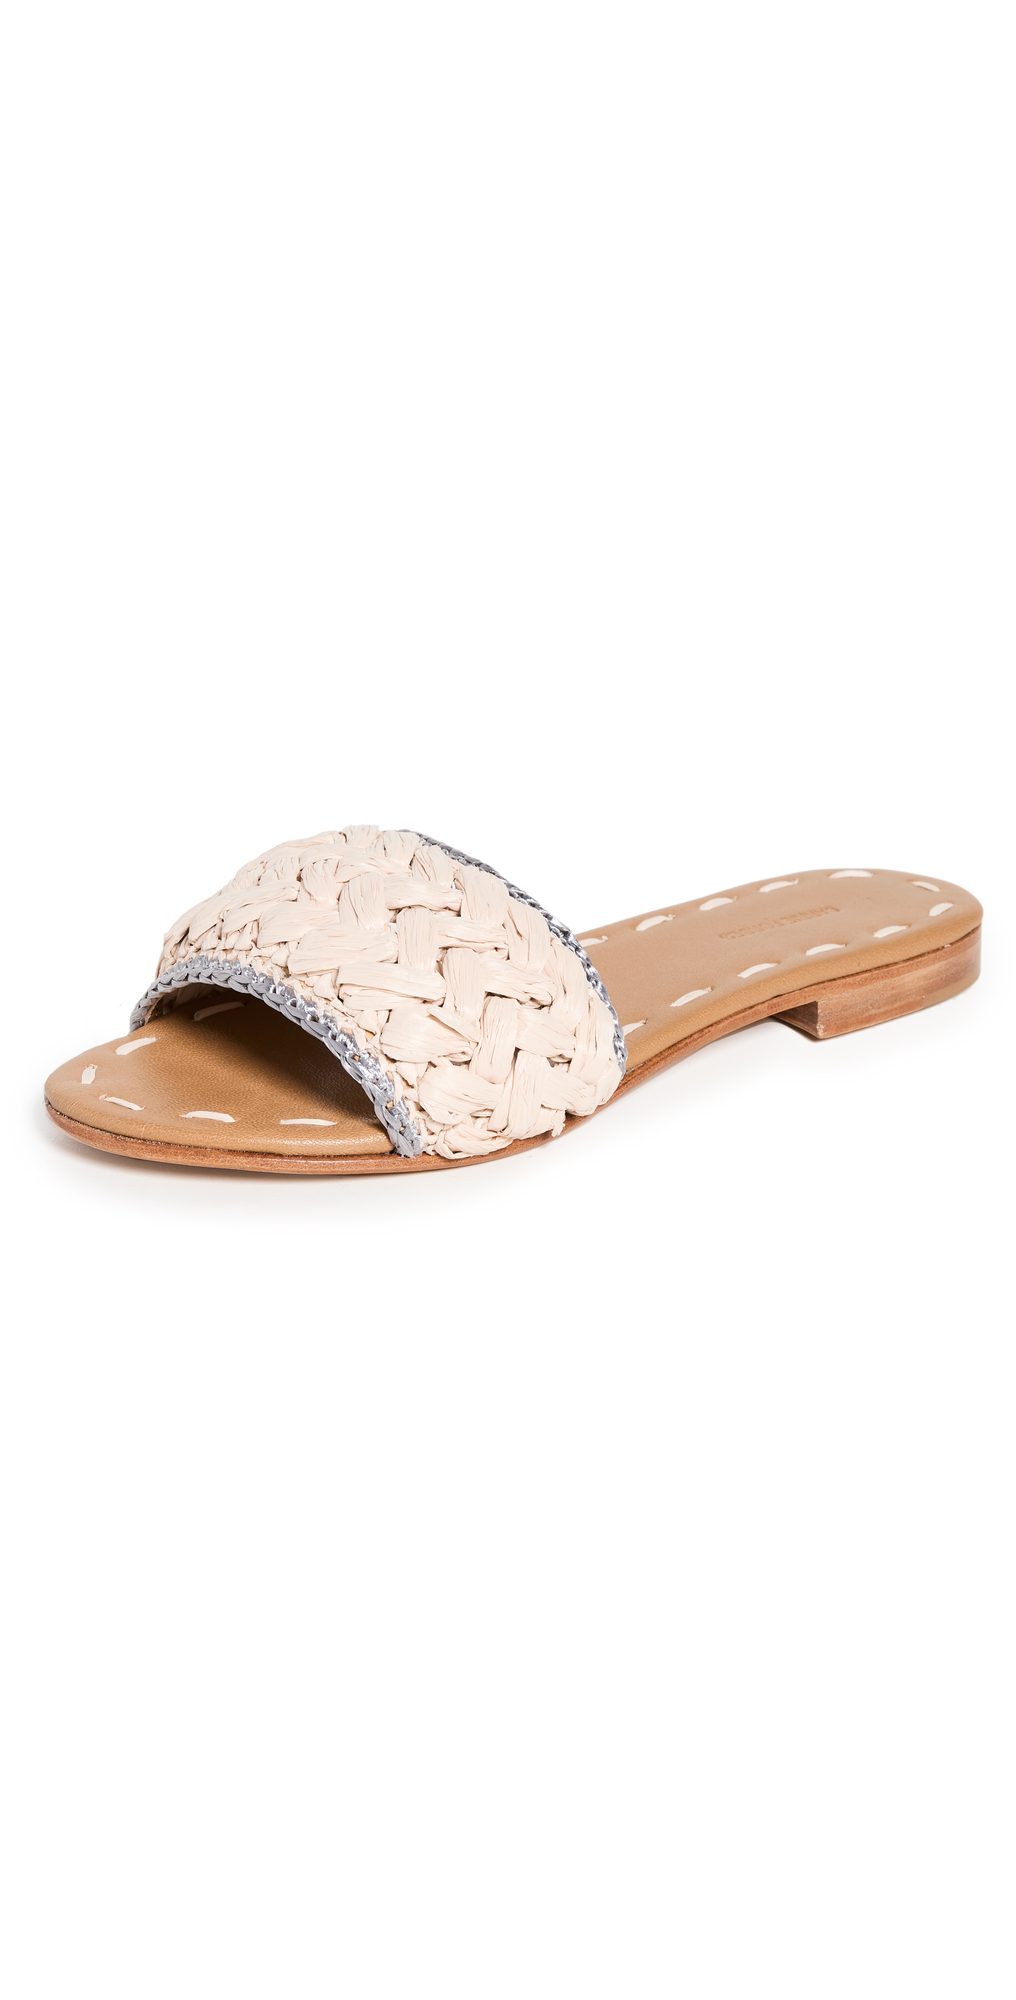 Carrie Forbes Trensa Slides in natural / silver